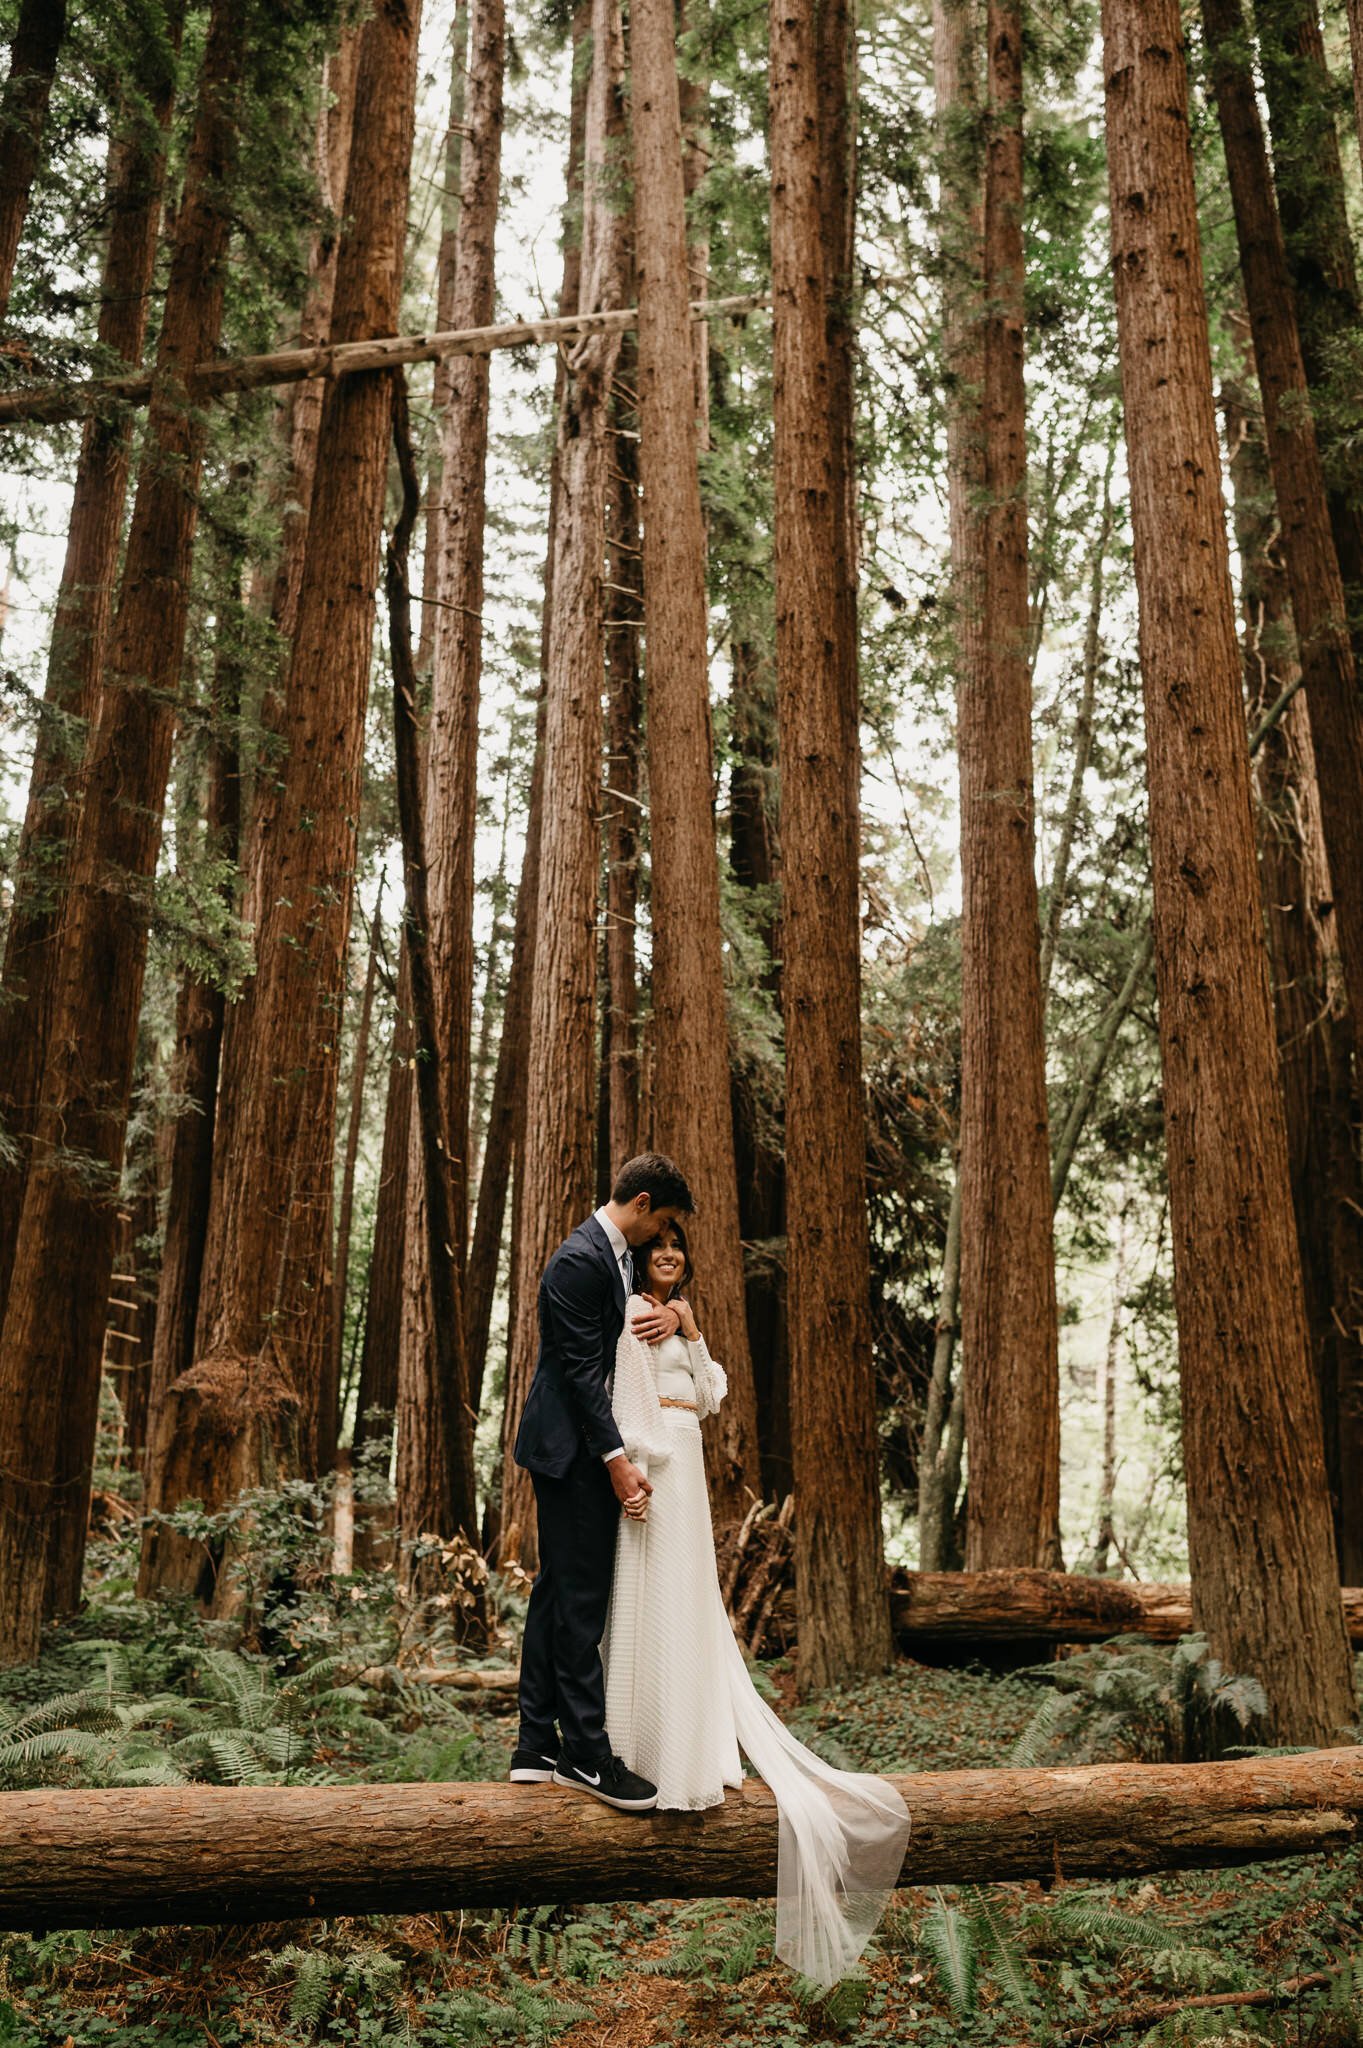 newly married couple in wedding attire standing on fallen redwood tree embracing. Tall redwood trees and ferns in background. 